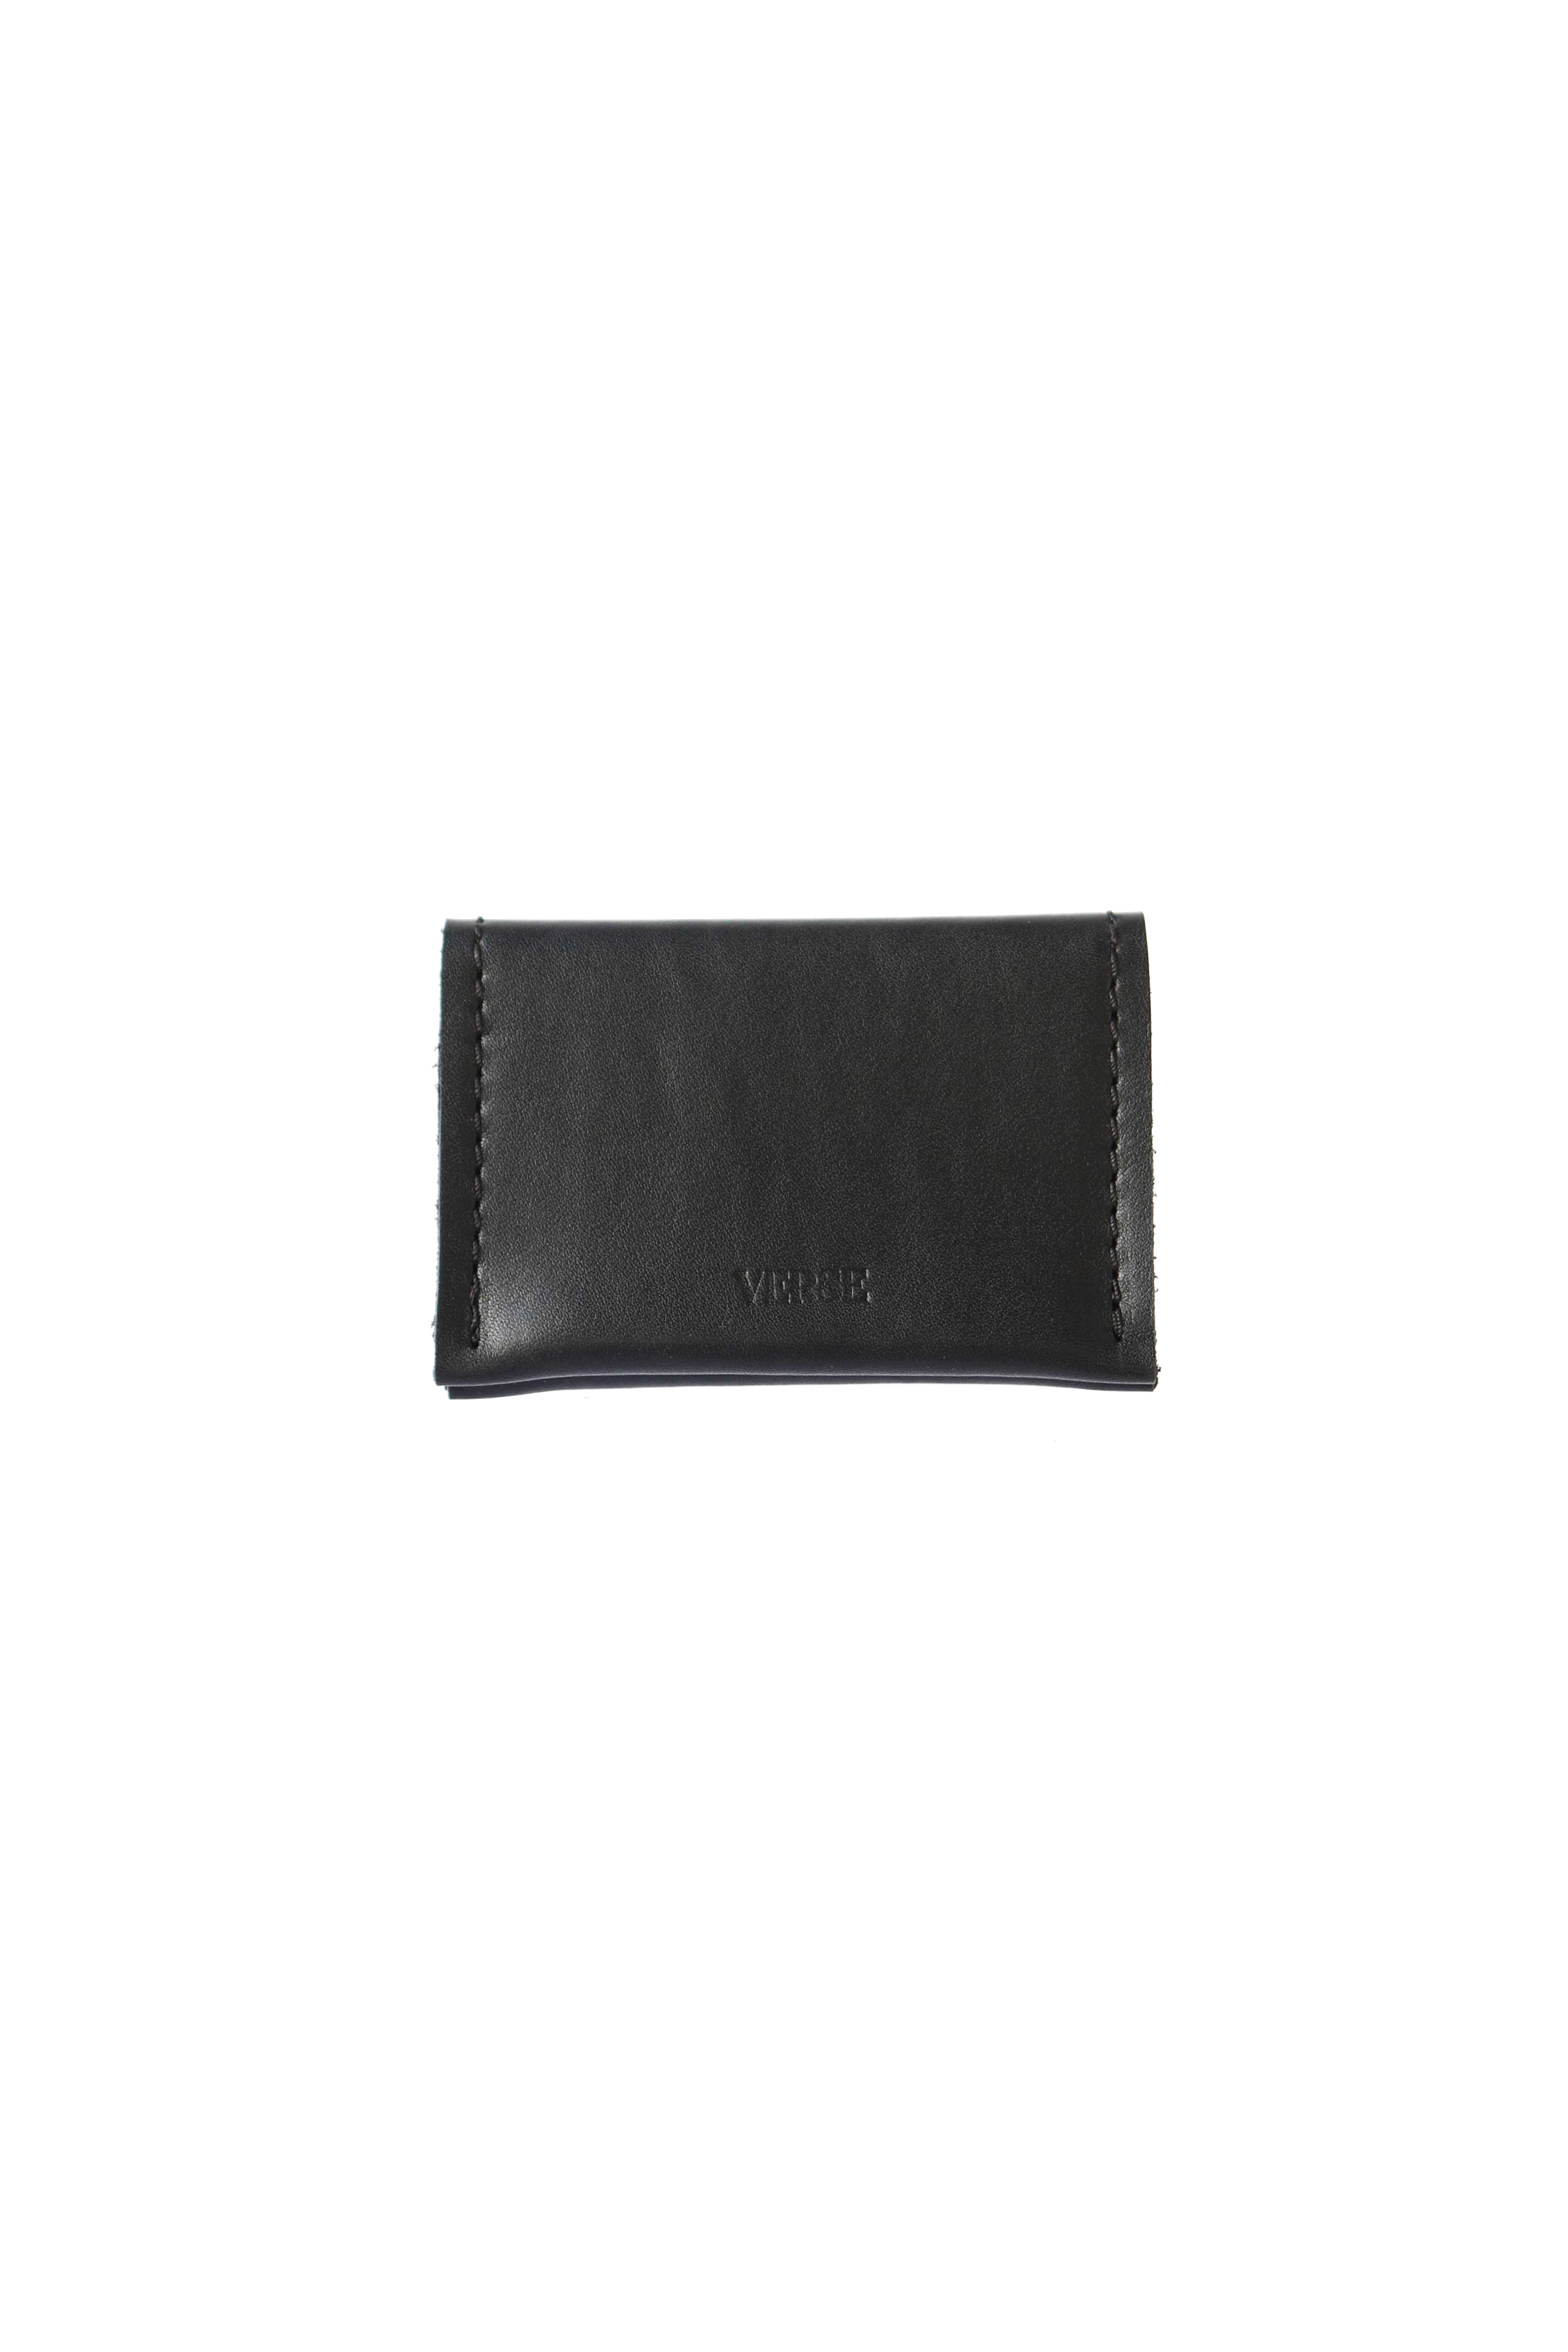 Small Fortune Leather Wallet in Coal Black